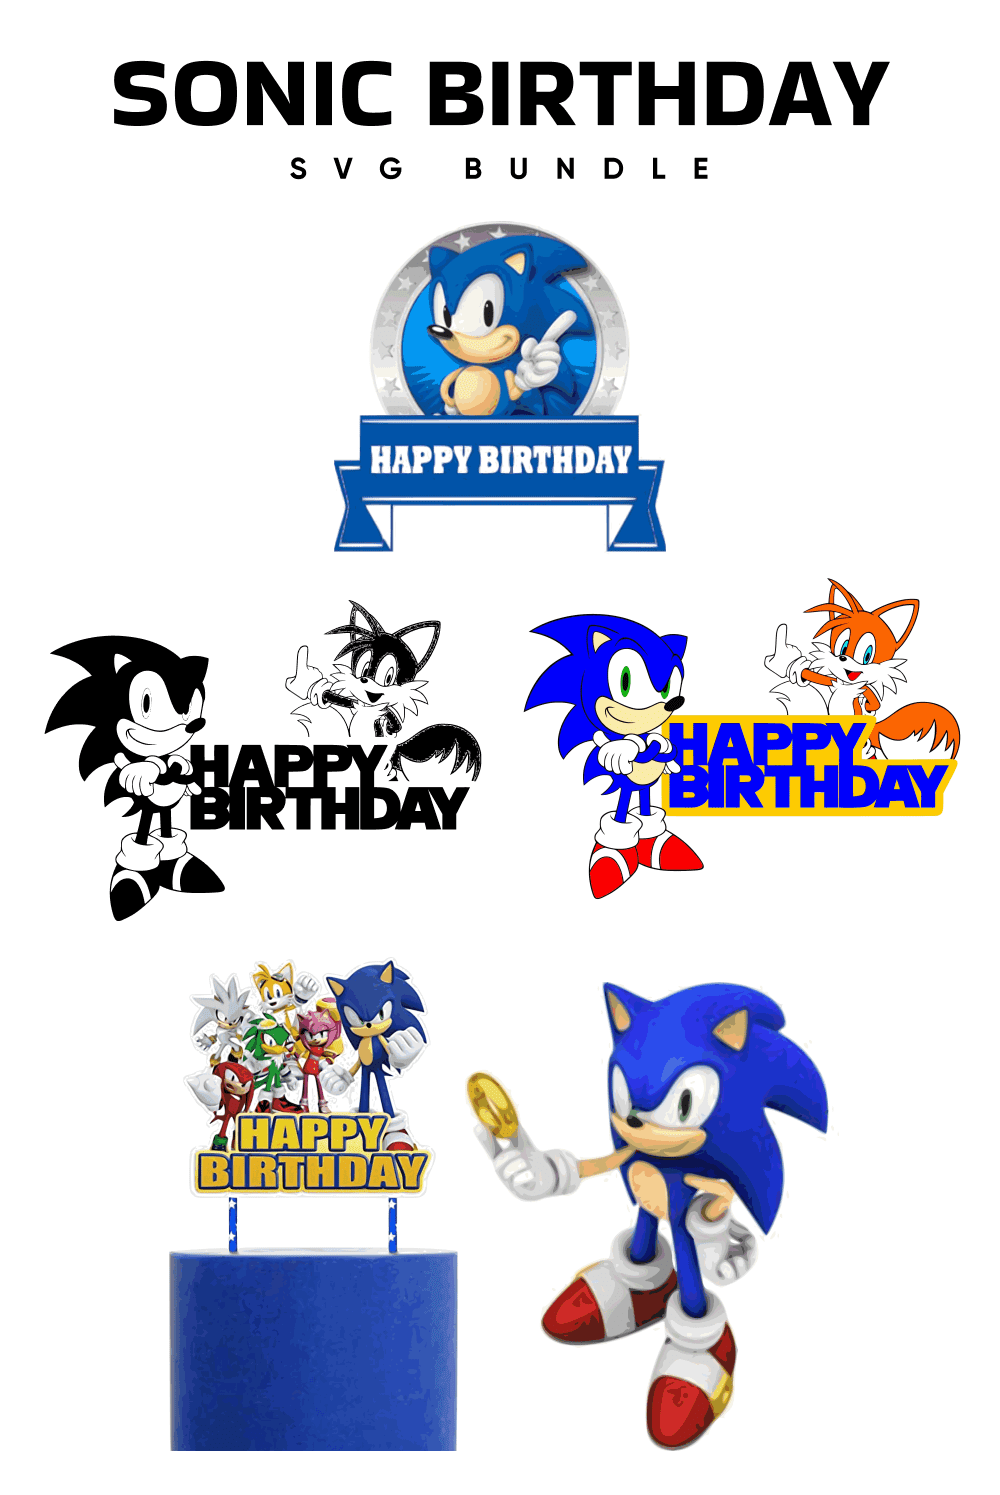 A set of gorgeous images sonic birthday.